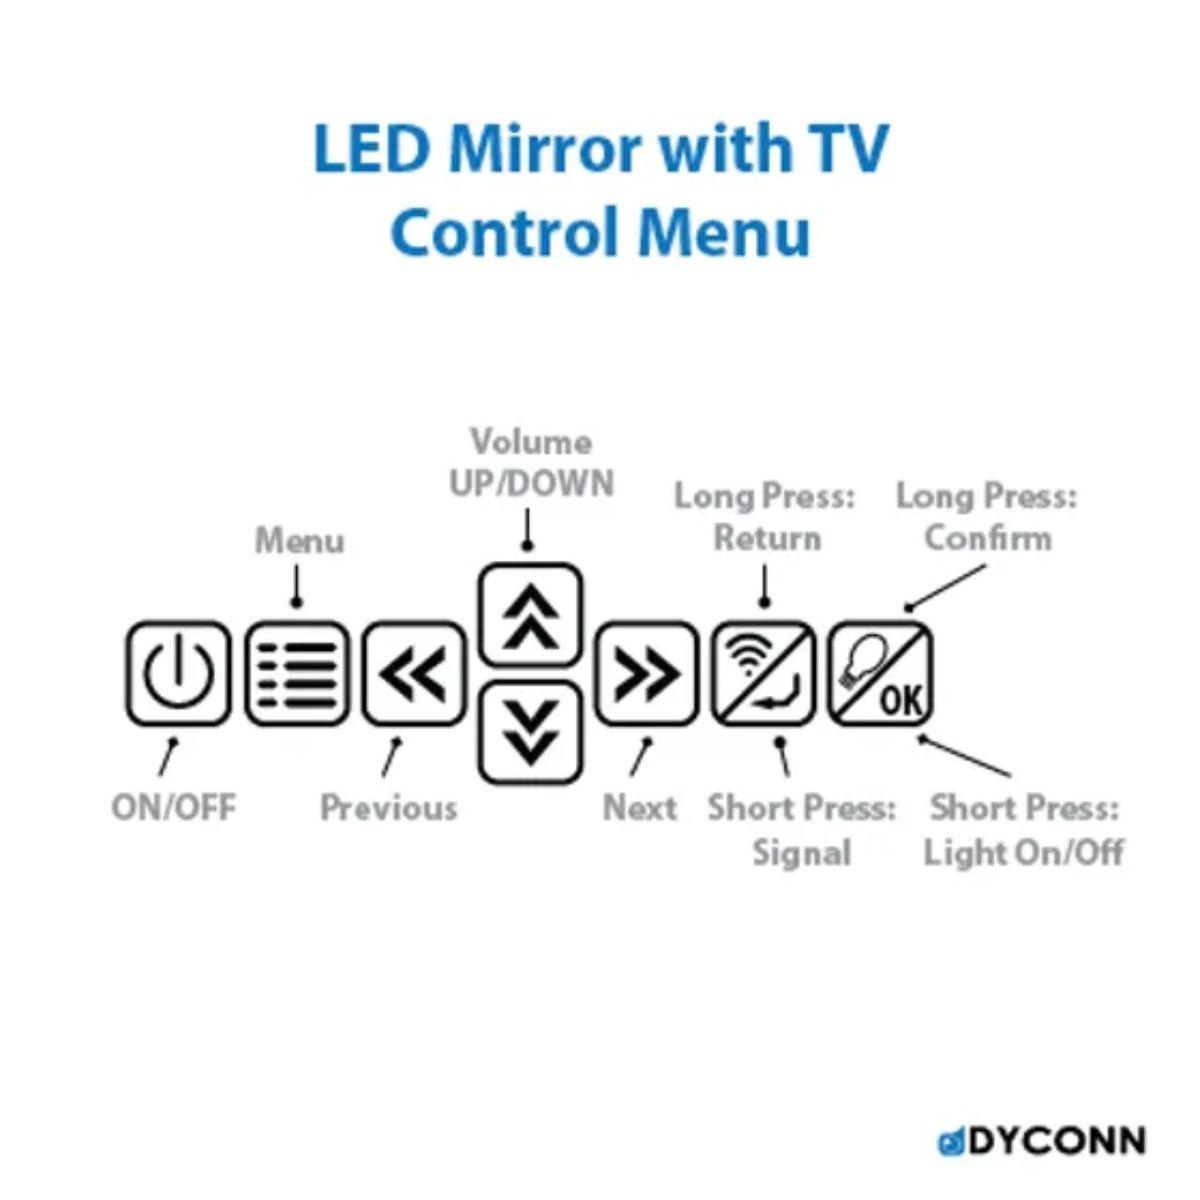 Edison 48 In. X 36 In. LED Wall Mirror With 10 in. LCD Television and Touch On/Off Dimmer Function